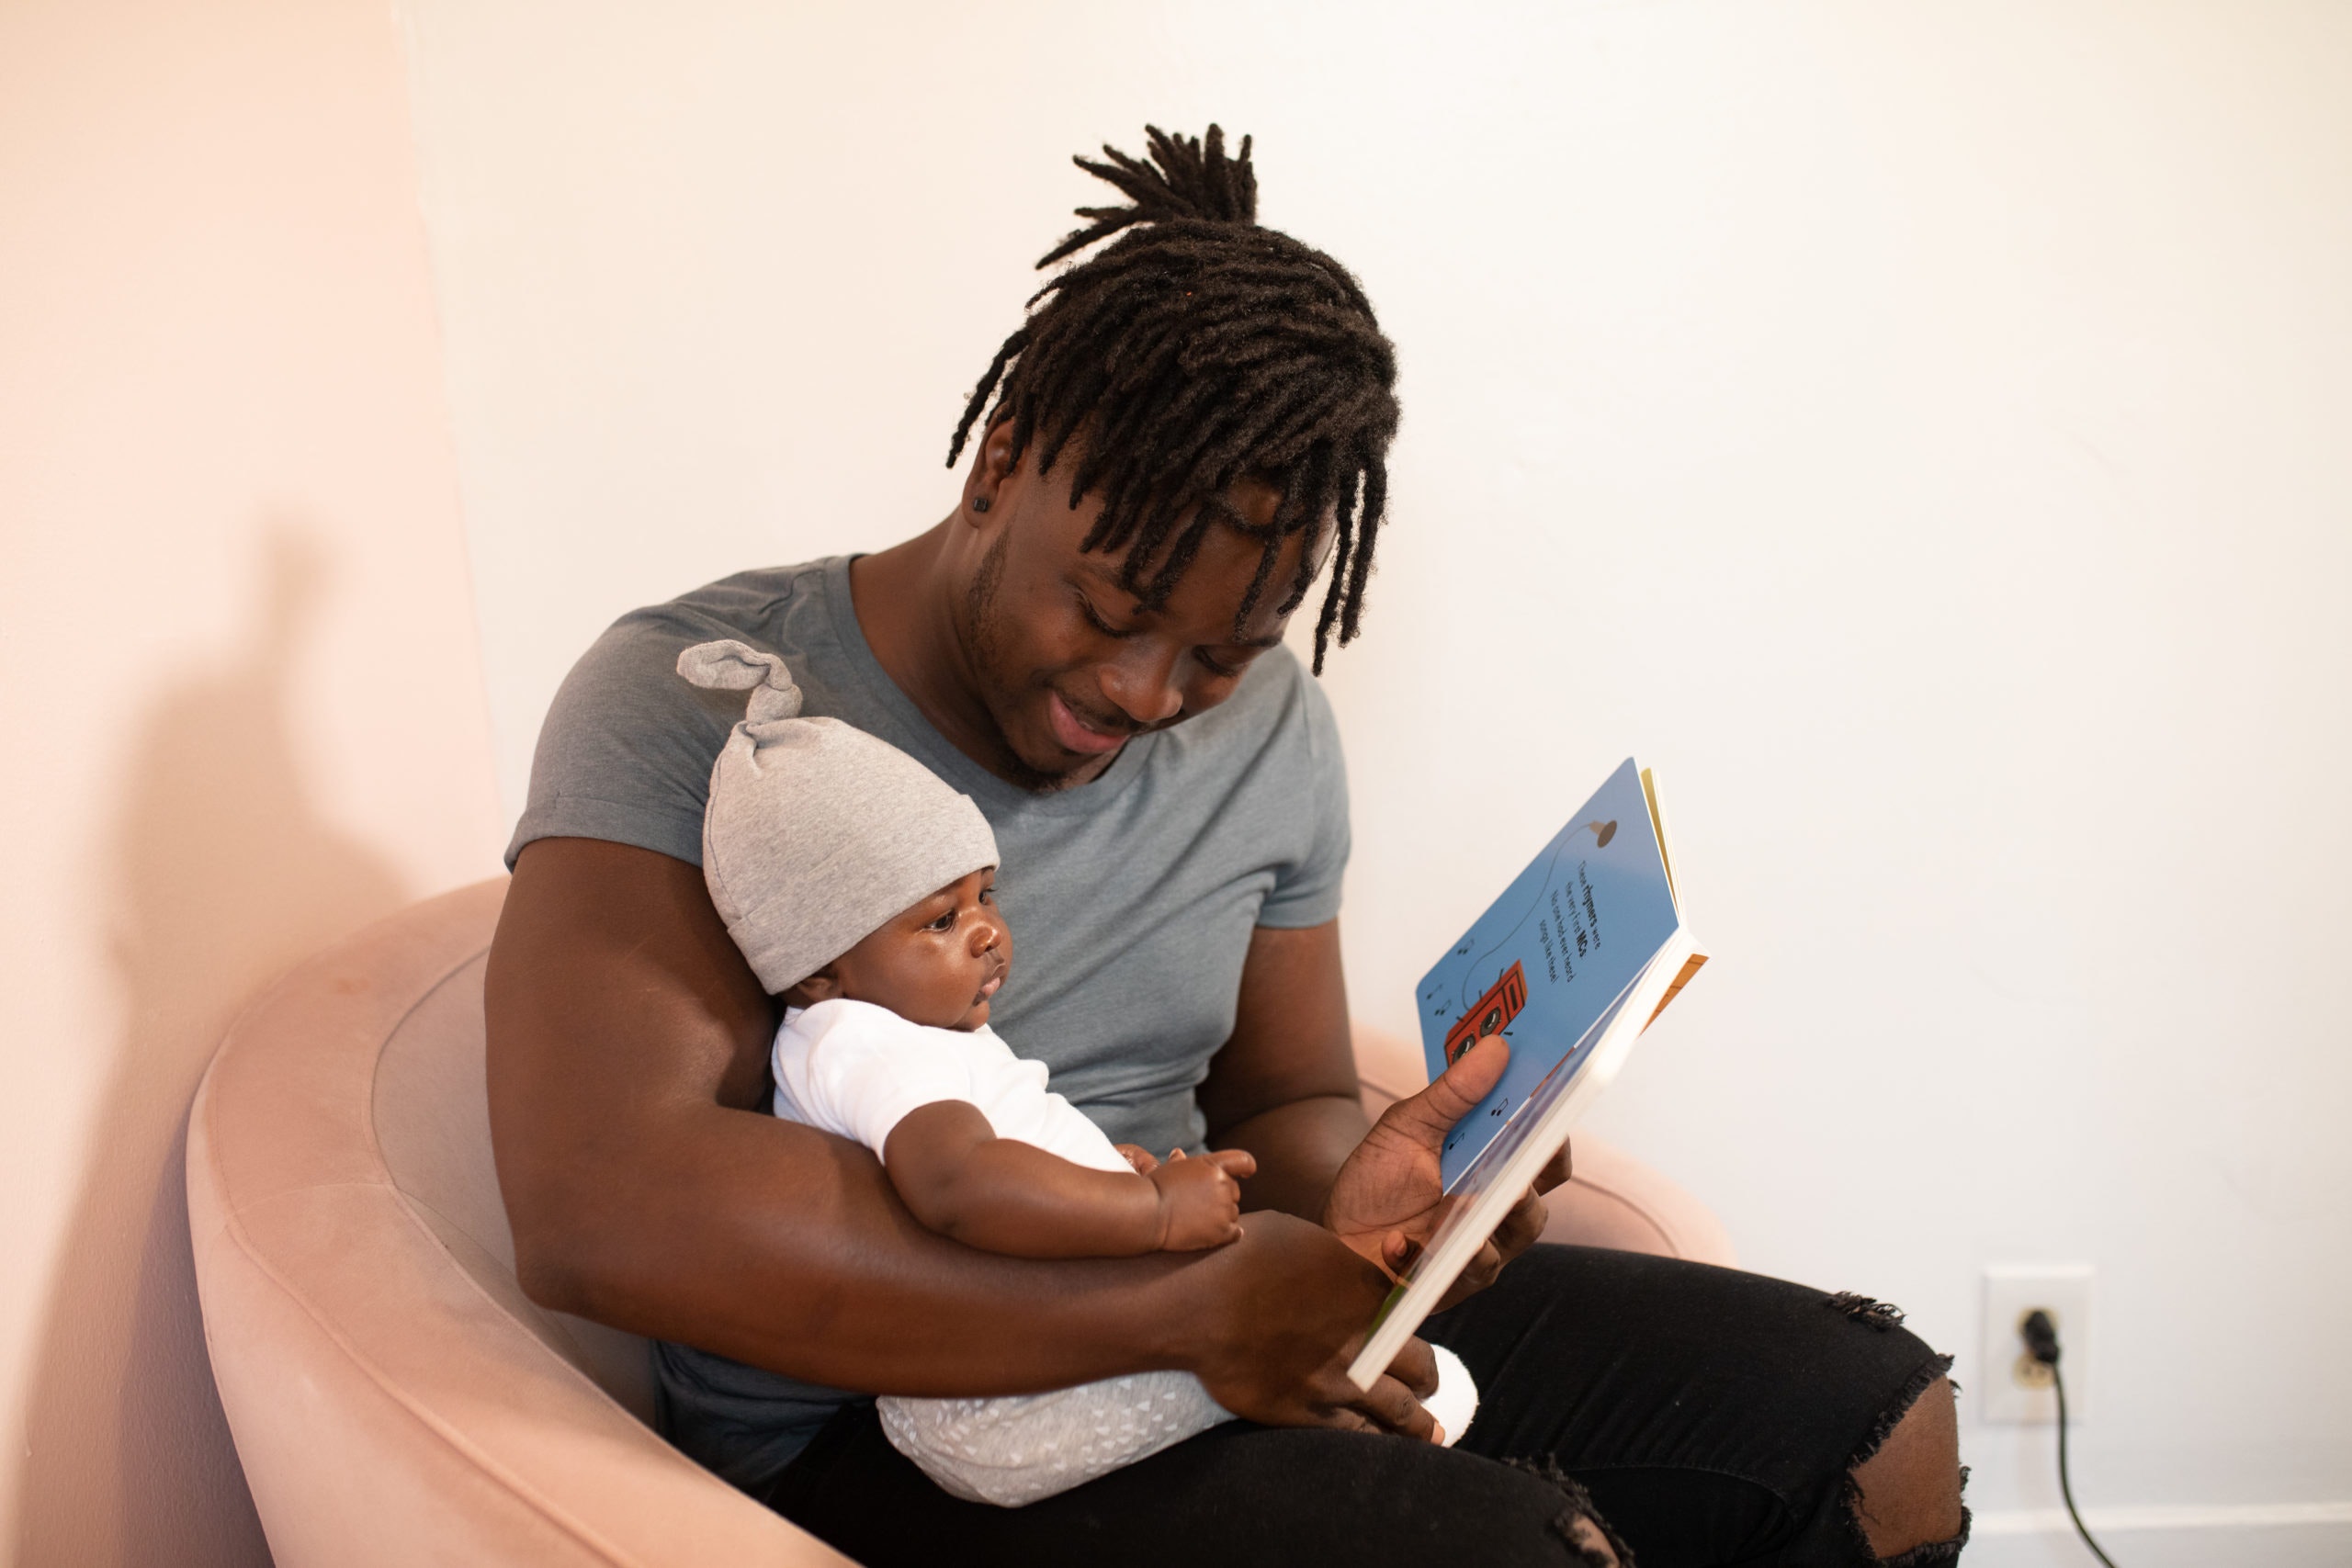 Dad is reading a book with little one